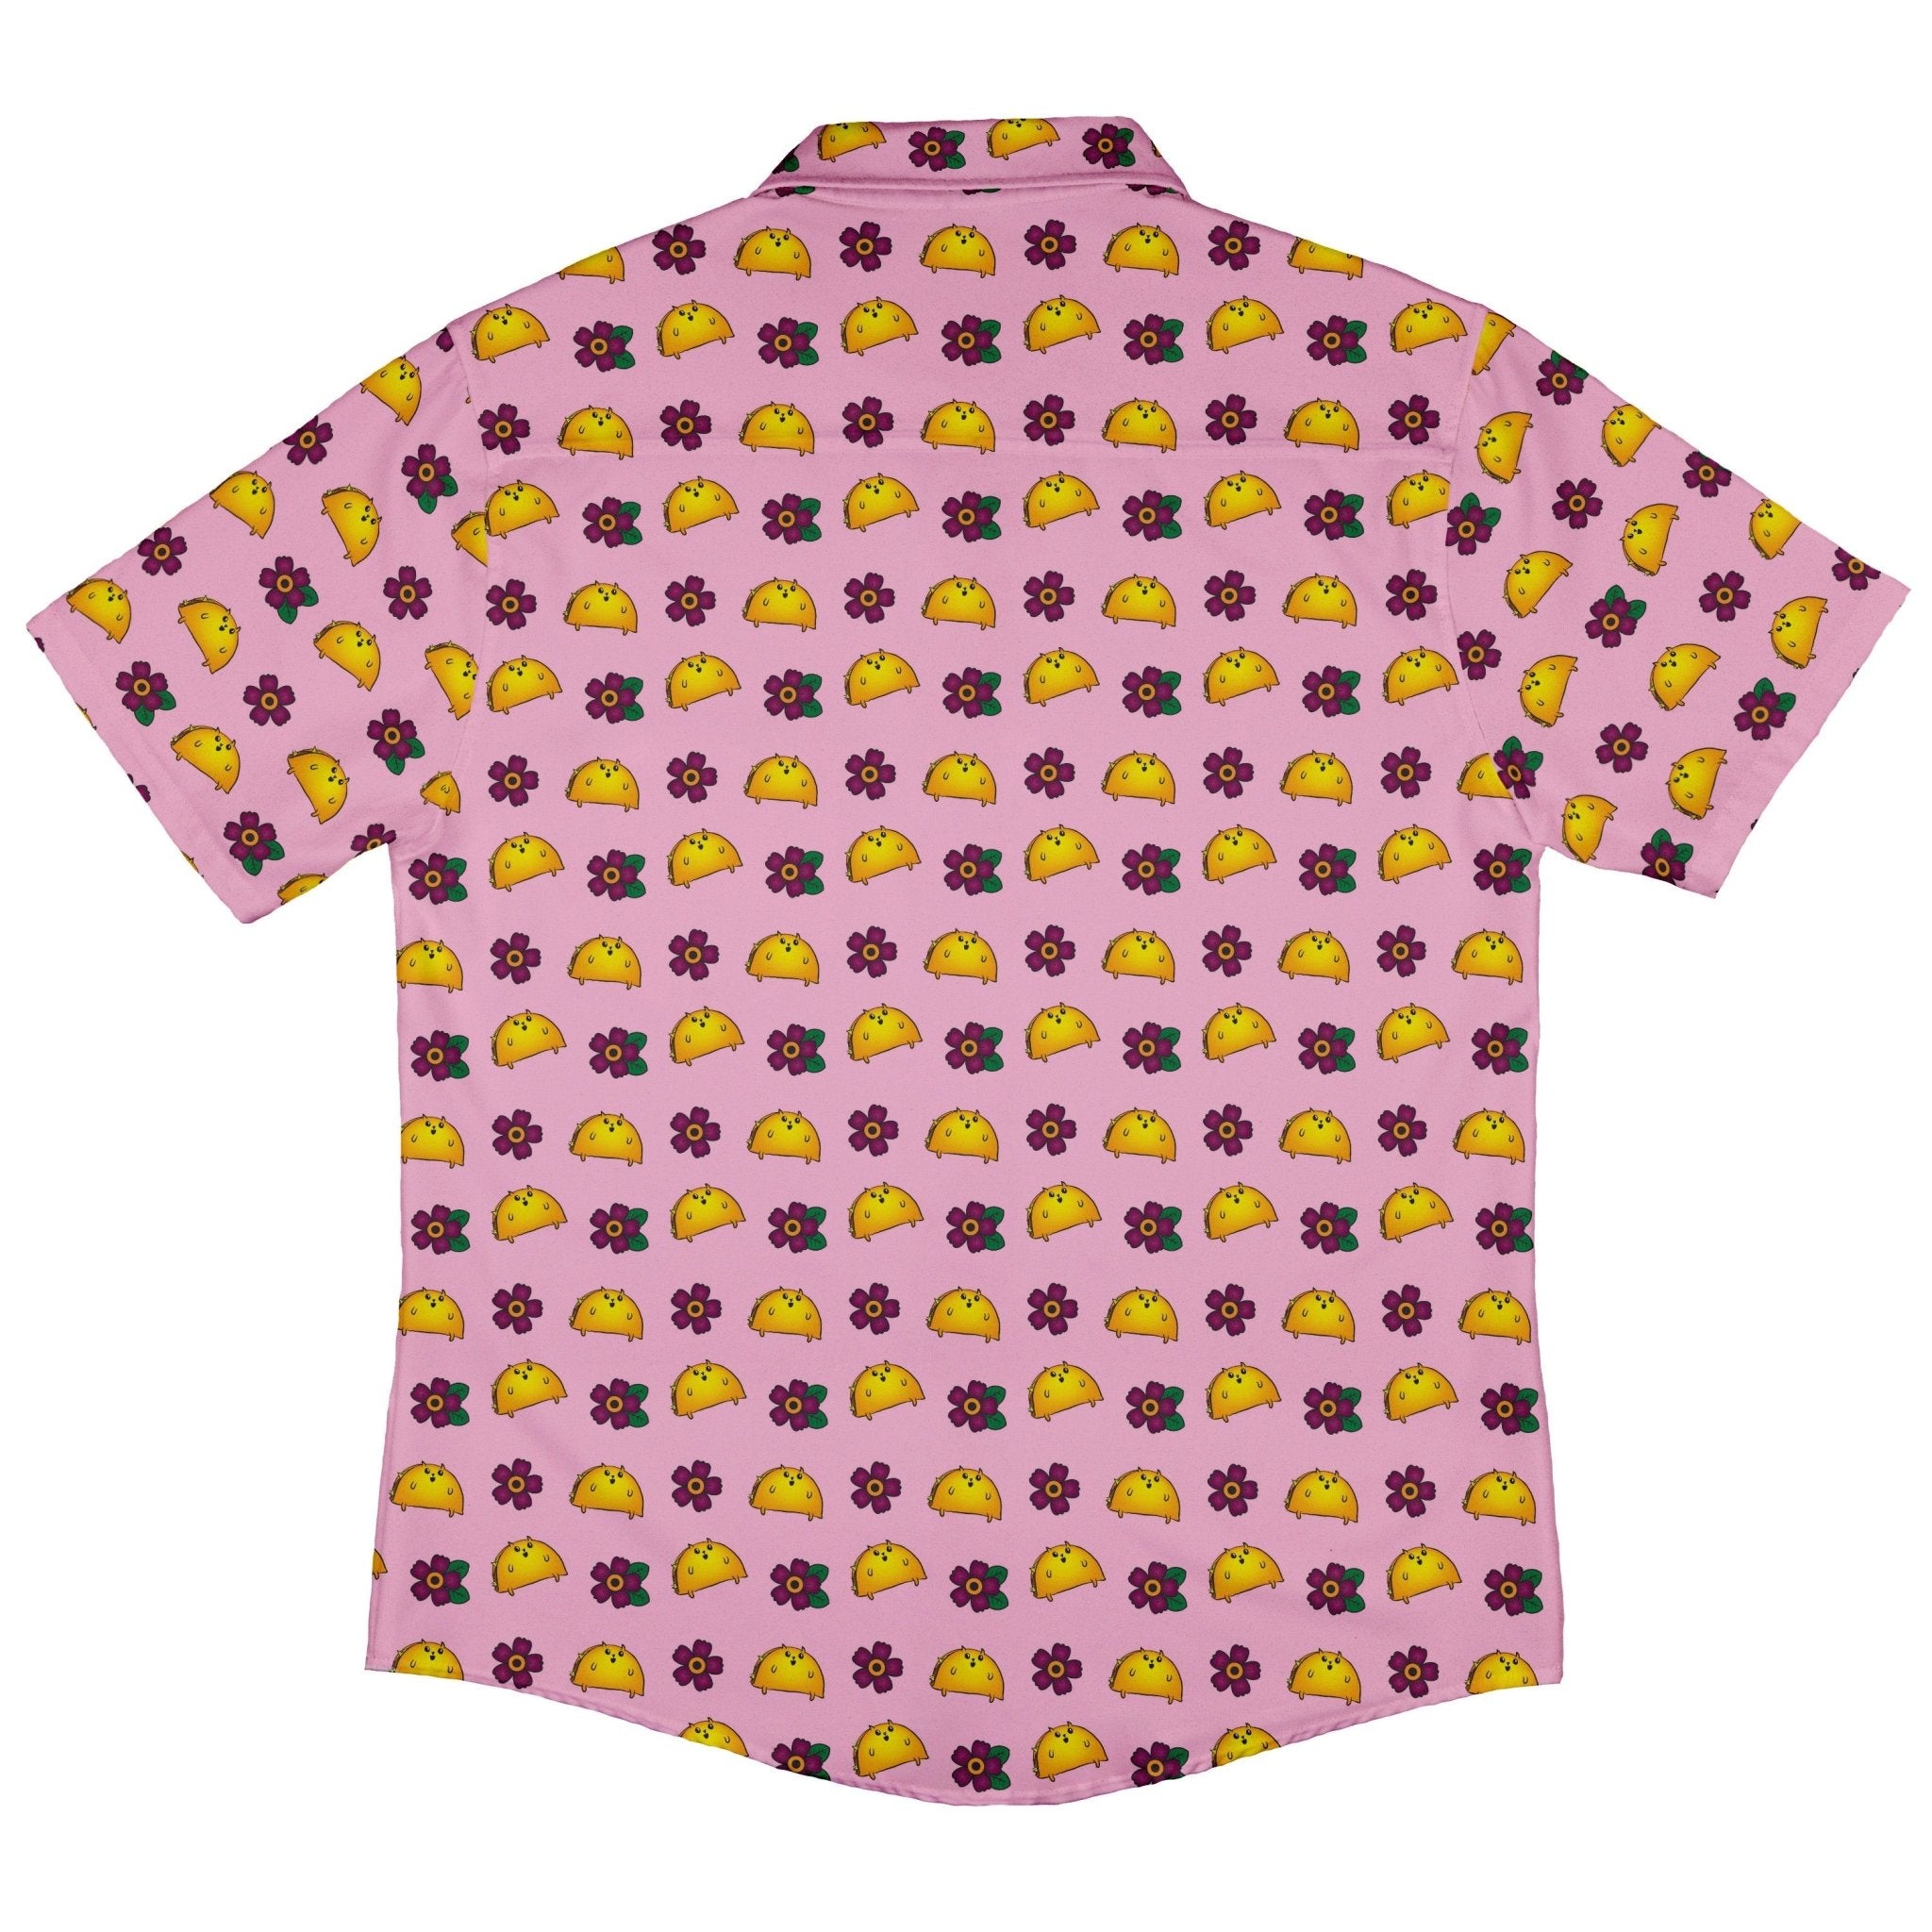 Exploding Kittens TacoCat Flowers Button Up Shirt - adult sizing - Animal Patterns - board game print